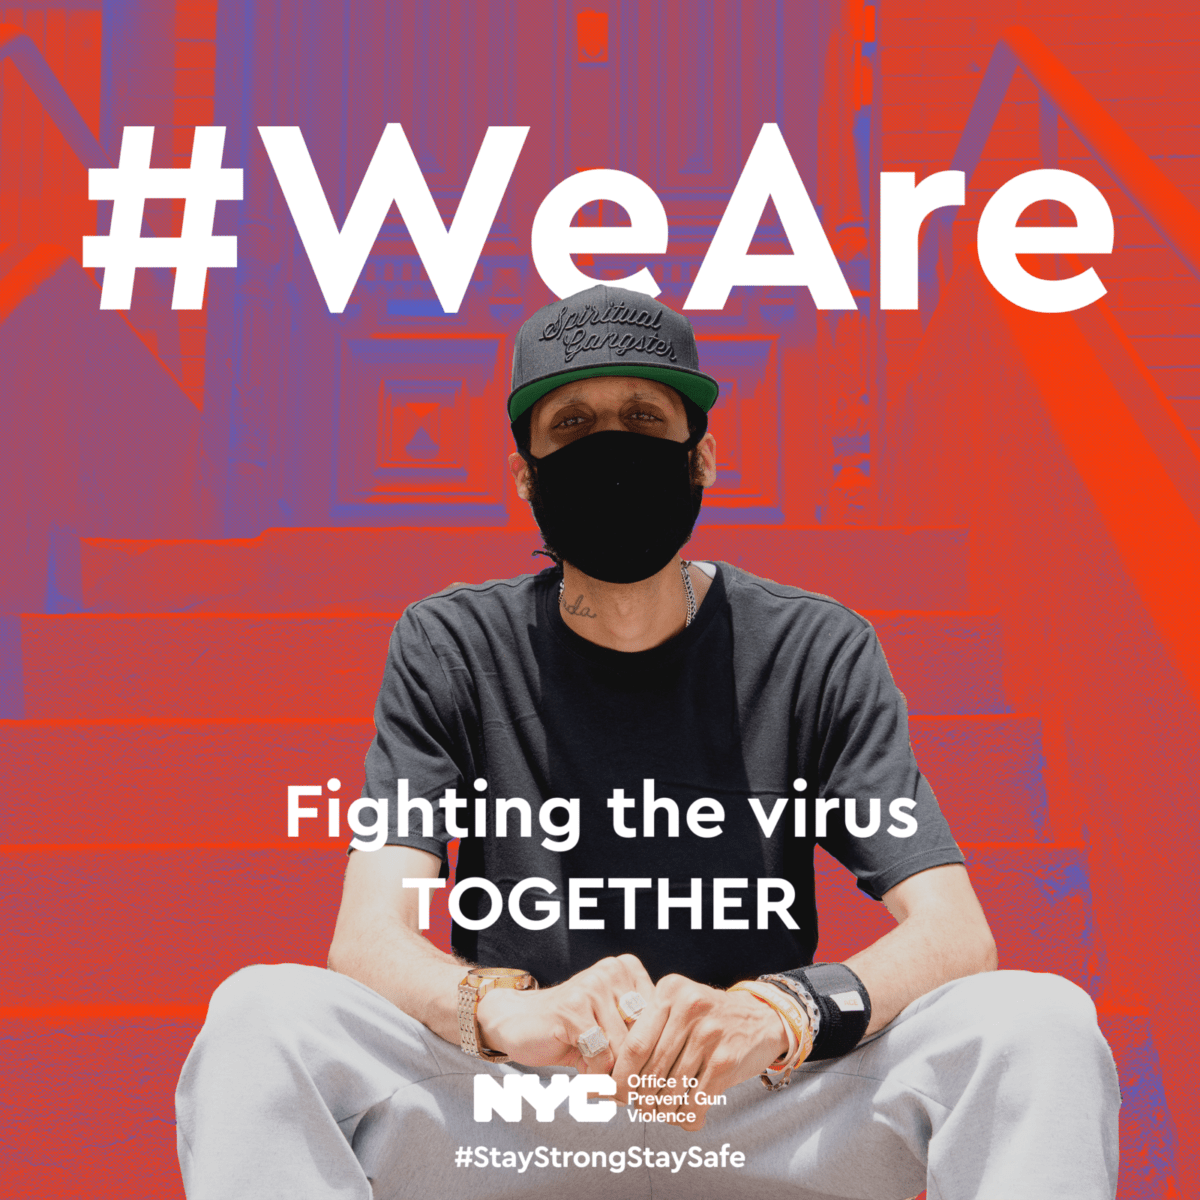 #WeAre Fighting the virus TOGETHER